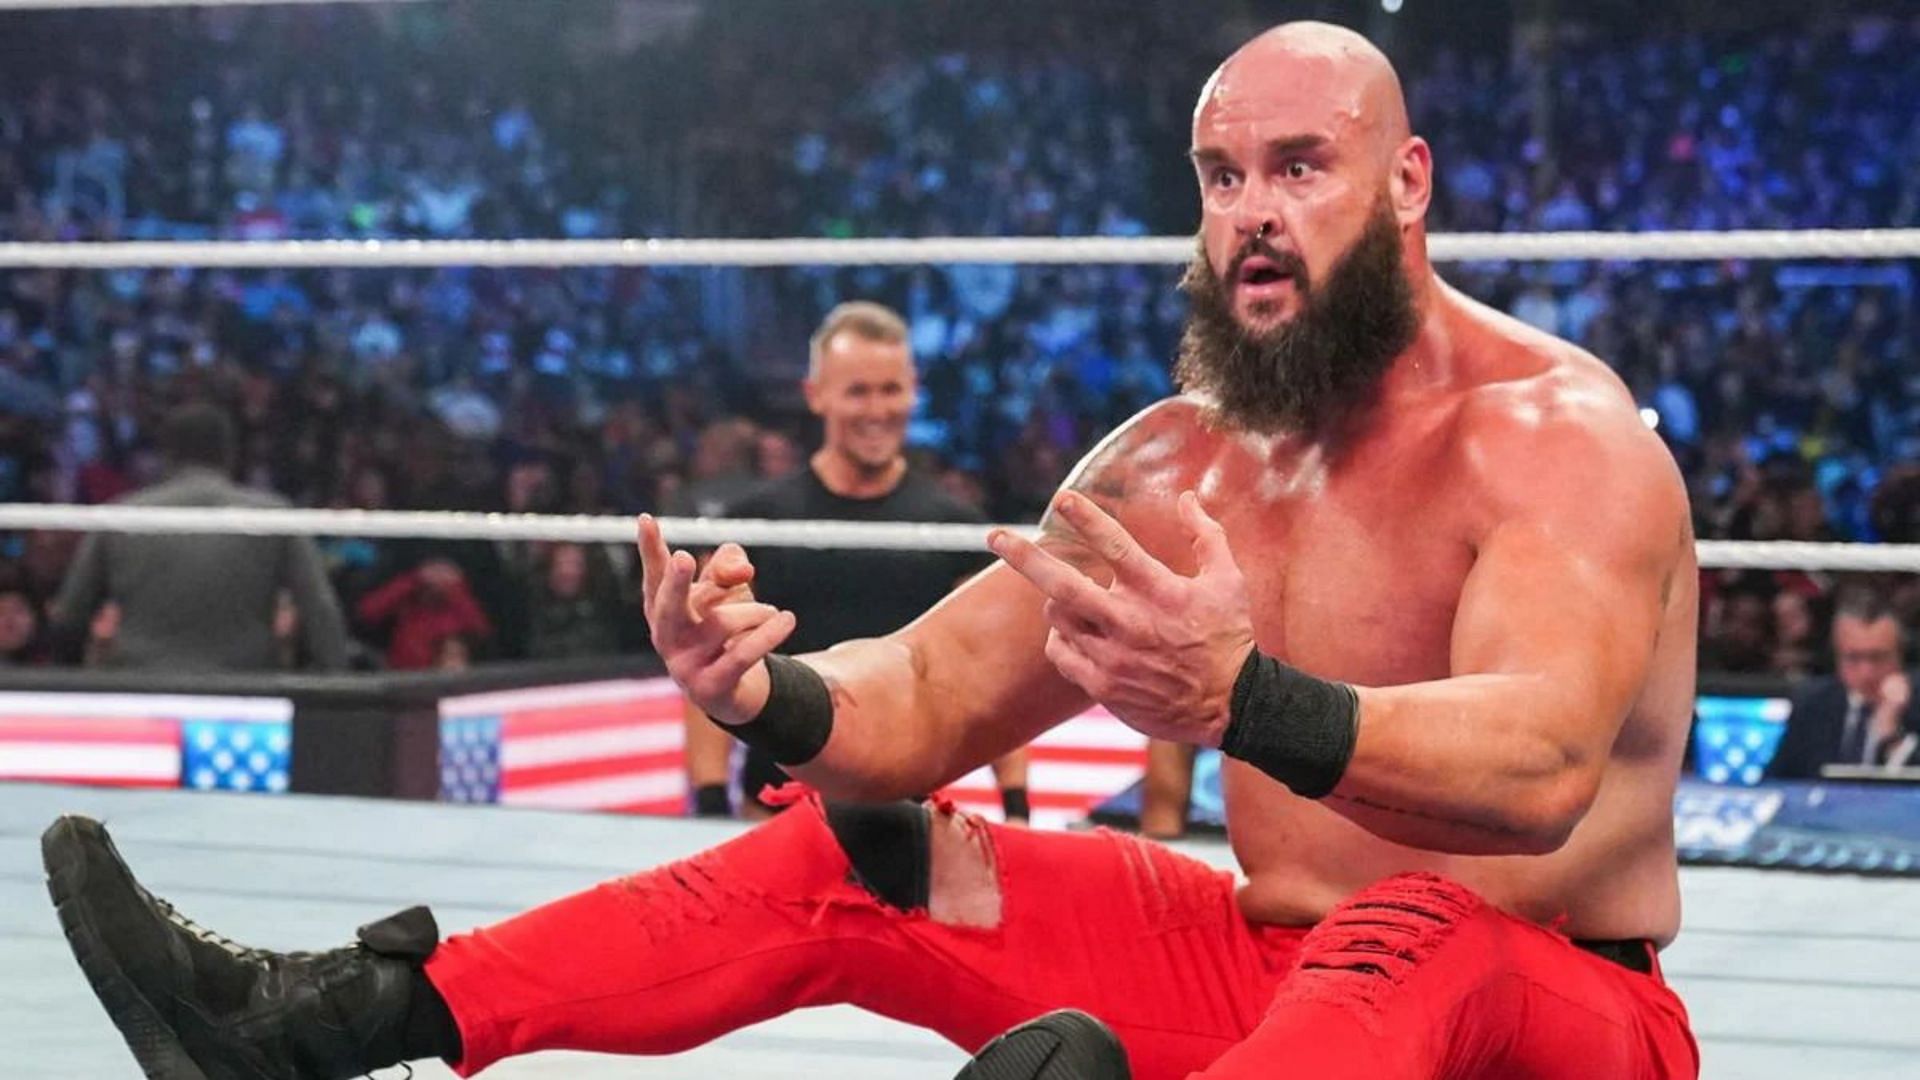 Braun Strowman is currently active on WWE SmackDown